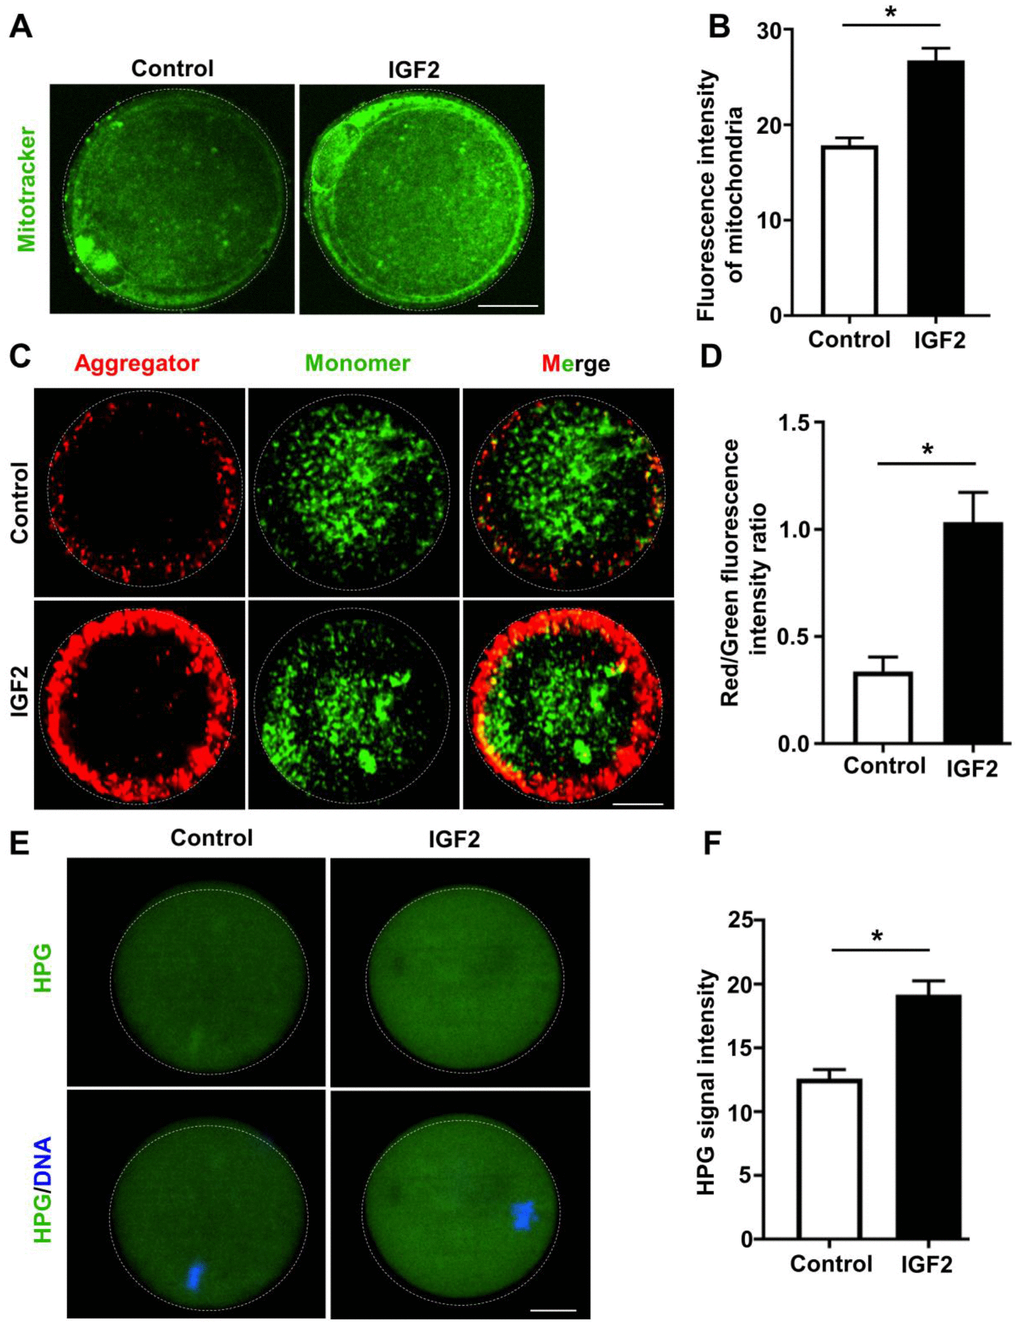 IGF2 improves the mitochondrial functional activity of oocytes from aged mice. (A) Mitochondria were stained with mitotracker Green FM (green). Scale bar = 20 μm. (B) Quantification of mitochondrial distribution signals in control oocytes (n = 26) and IGF2-treated oocytes (n = 25). A Student’s t-test (two-tailed). *p C) JC-1 staining showing the mitochondrial membrane potential (MMP) in control and IGF2-treated oocytes. (D) Quantification of the red/green fluorescence intensity ratio in control oocytes (n = 40) and IGF2-treated oocytes (n = 35). A Student’s t-test (two-tailed). *p E) HPG Fluorescent staining showing total protein synthesis in MII-stage oocytes with or without IGF2-treatment. Oocytes were incubated in M16 medium with 50 μM HPG for 1 h prior to staining. Scale bar = 30 μm. (F) Quantification of HPG signal intensity in control (n = 28) and IGF2-treated (n = 29) oocytes. *p t-test (two-tailed). Error bars indicate the SEM.